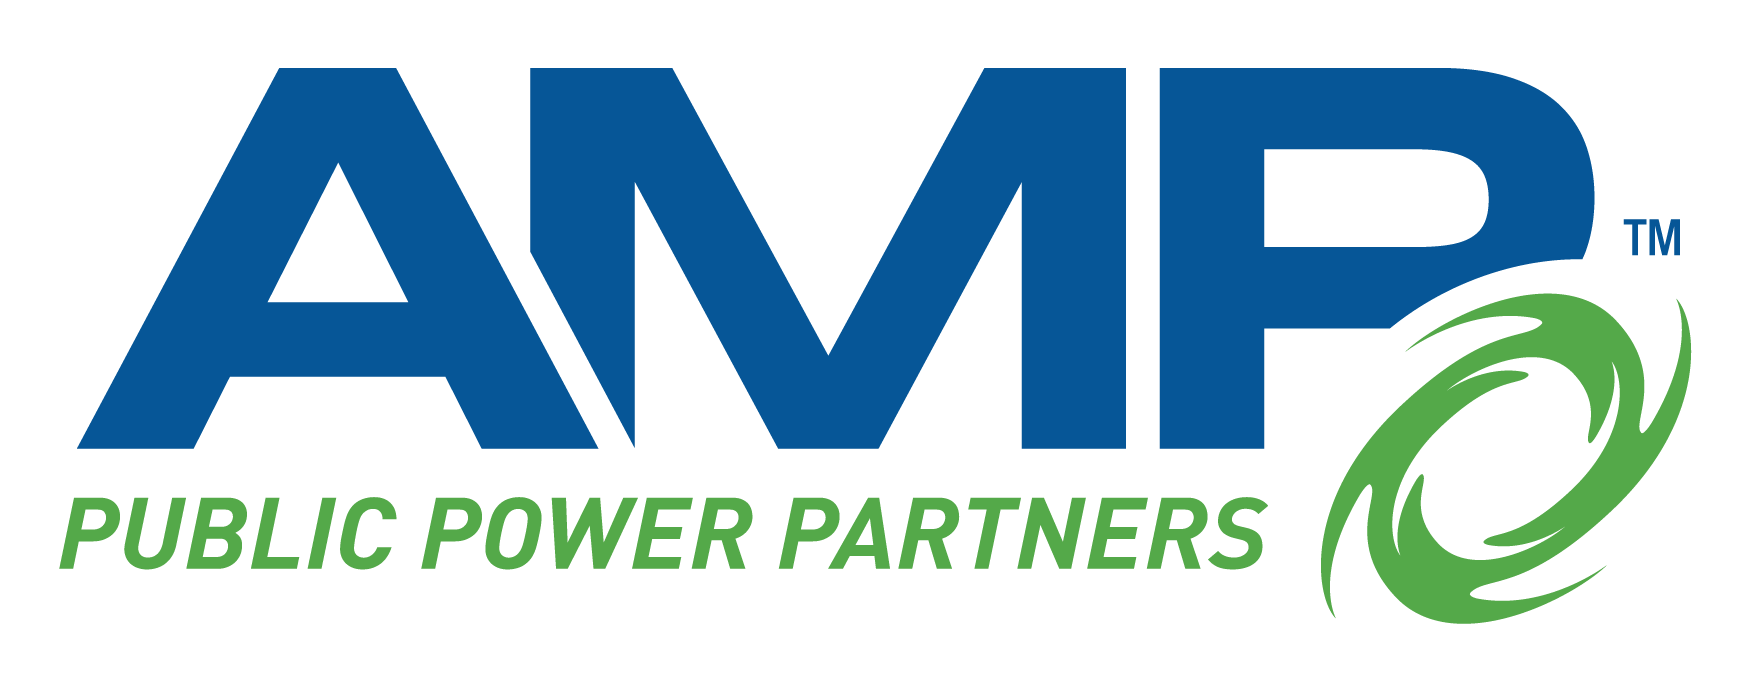 American Municipal Power, Inc. Investor Relations - Official Seal or Logo